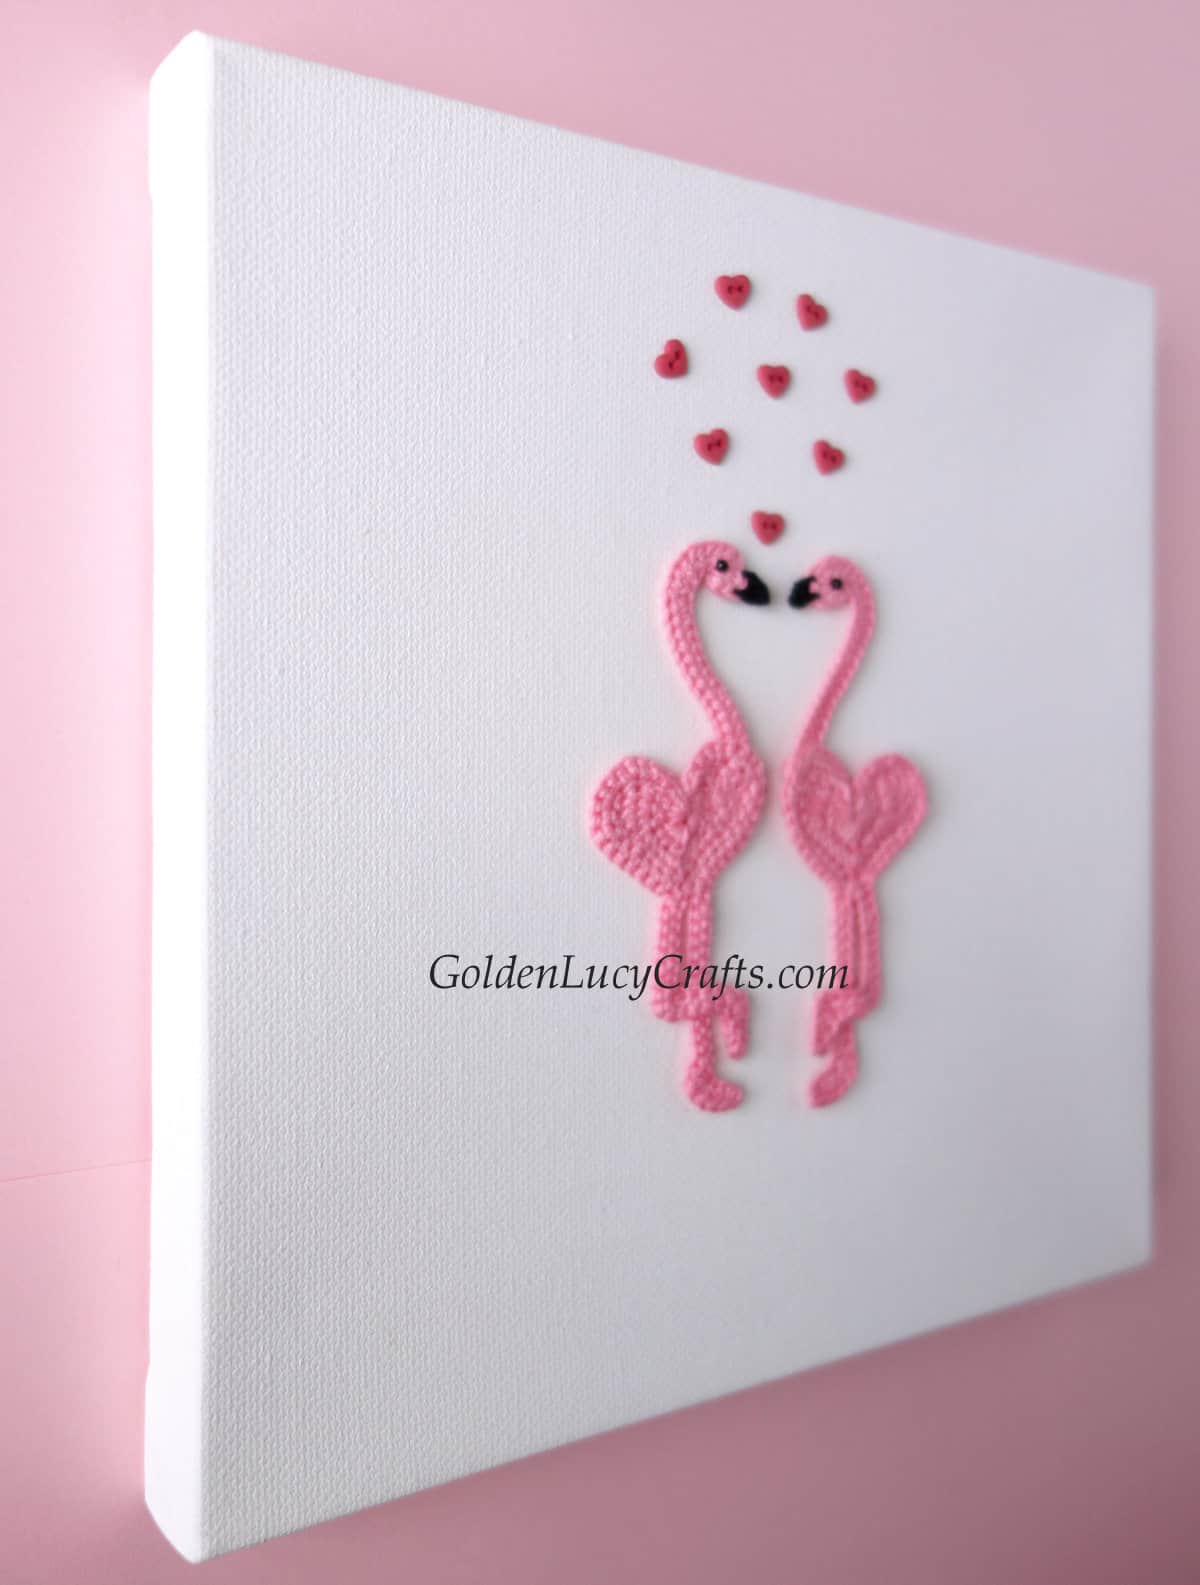 Valentine's Day wall art - two crocheted flamingo applique, side view.